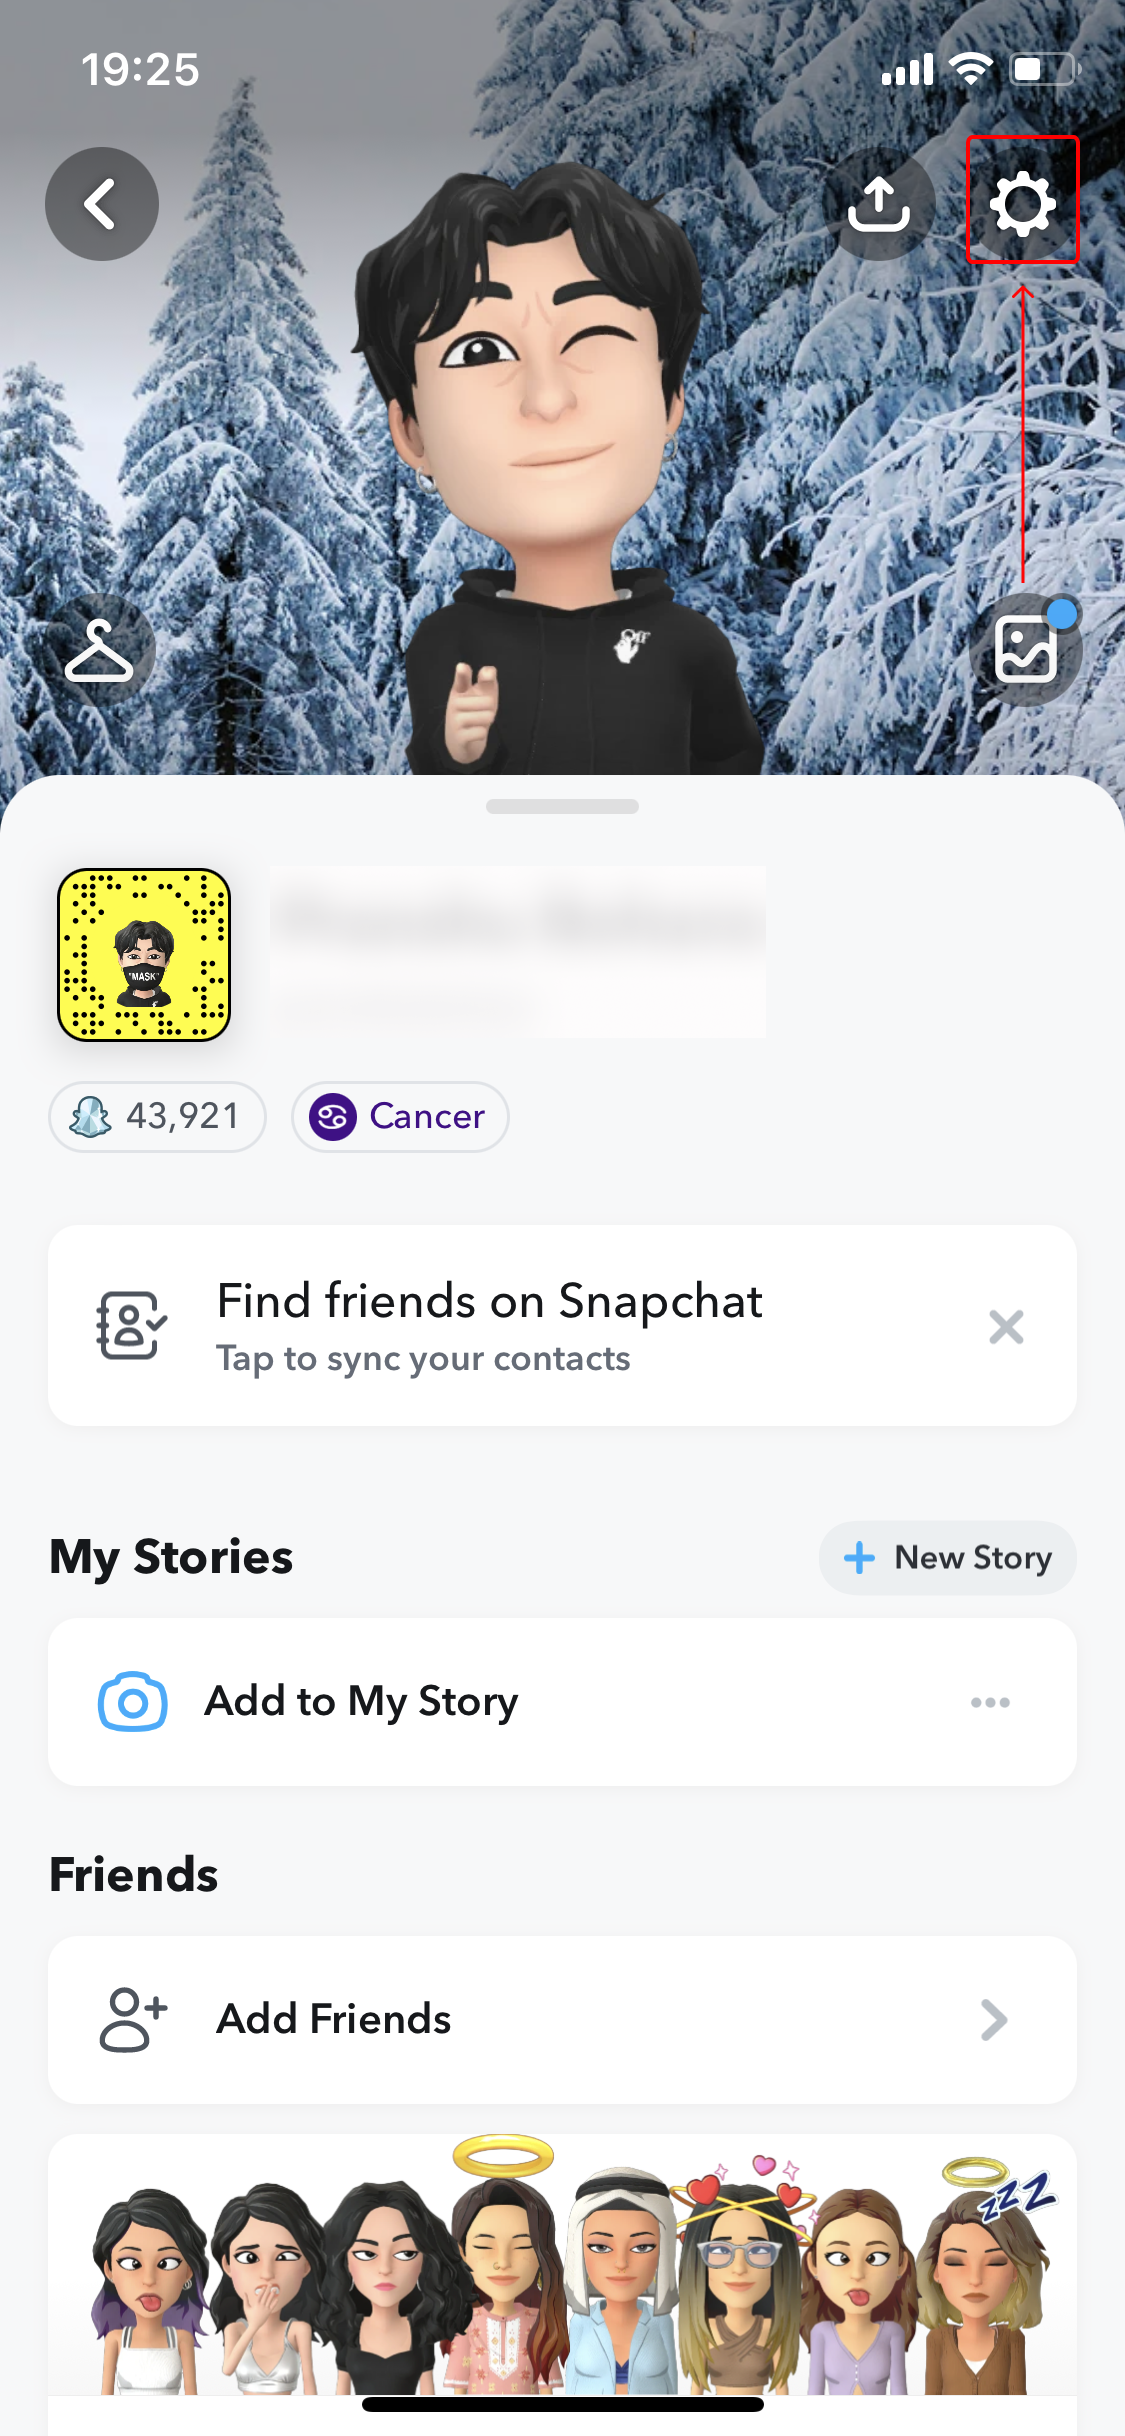 How to Delete a Snapchat Account?